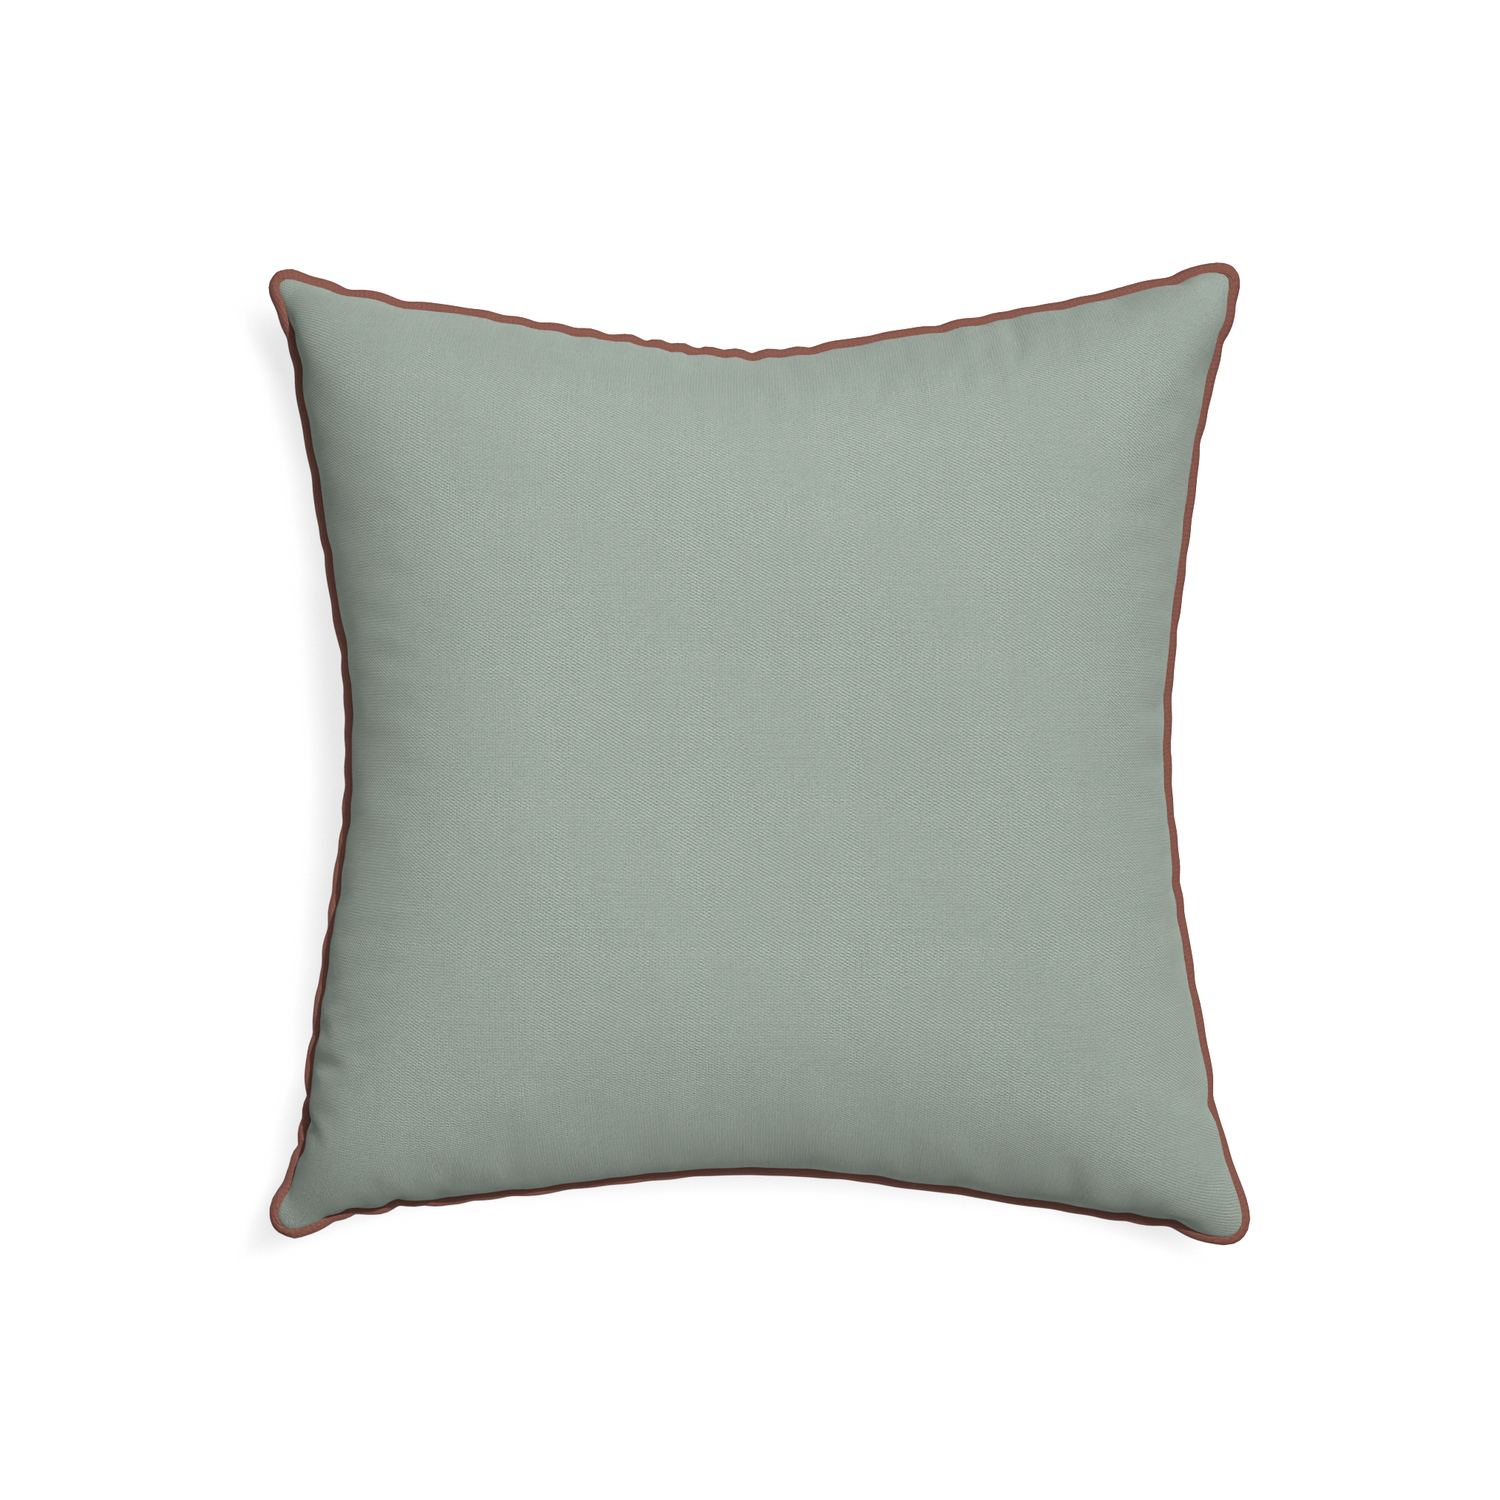 22-square sage custom sage green cottonpillow with w piping on white background